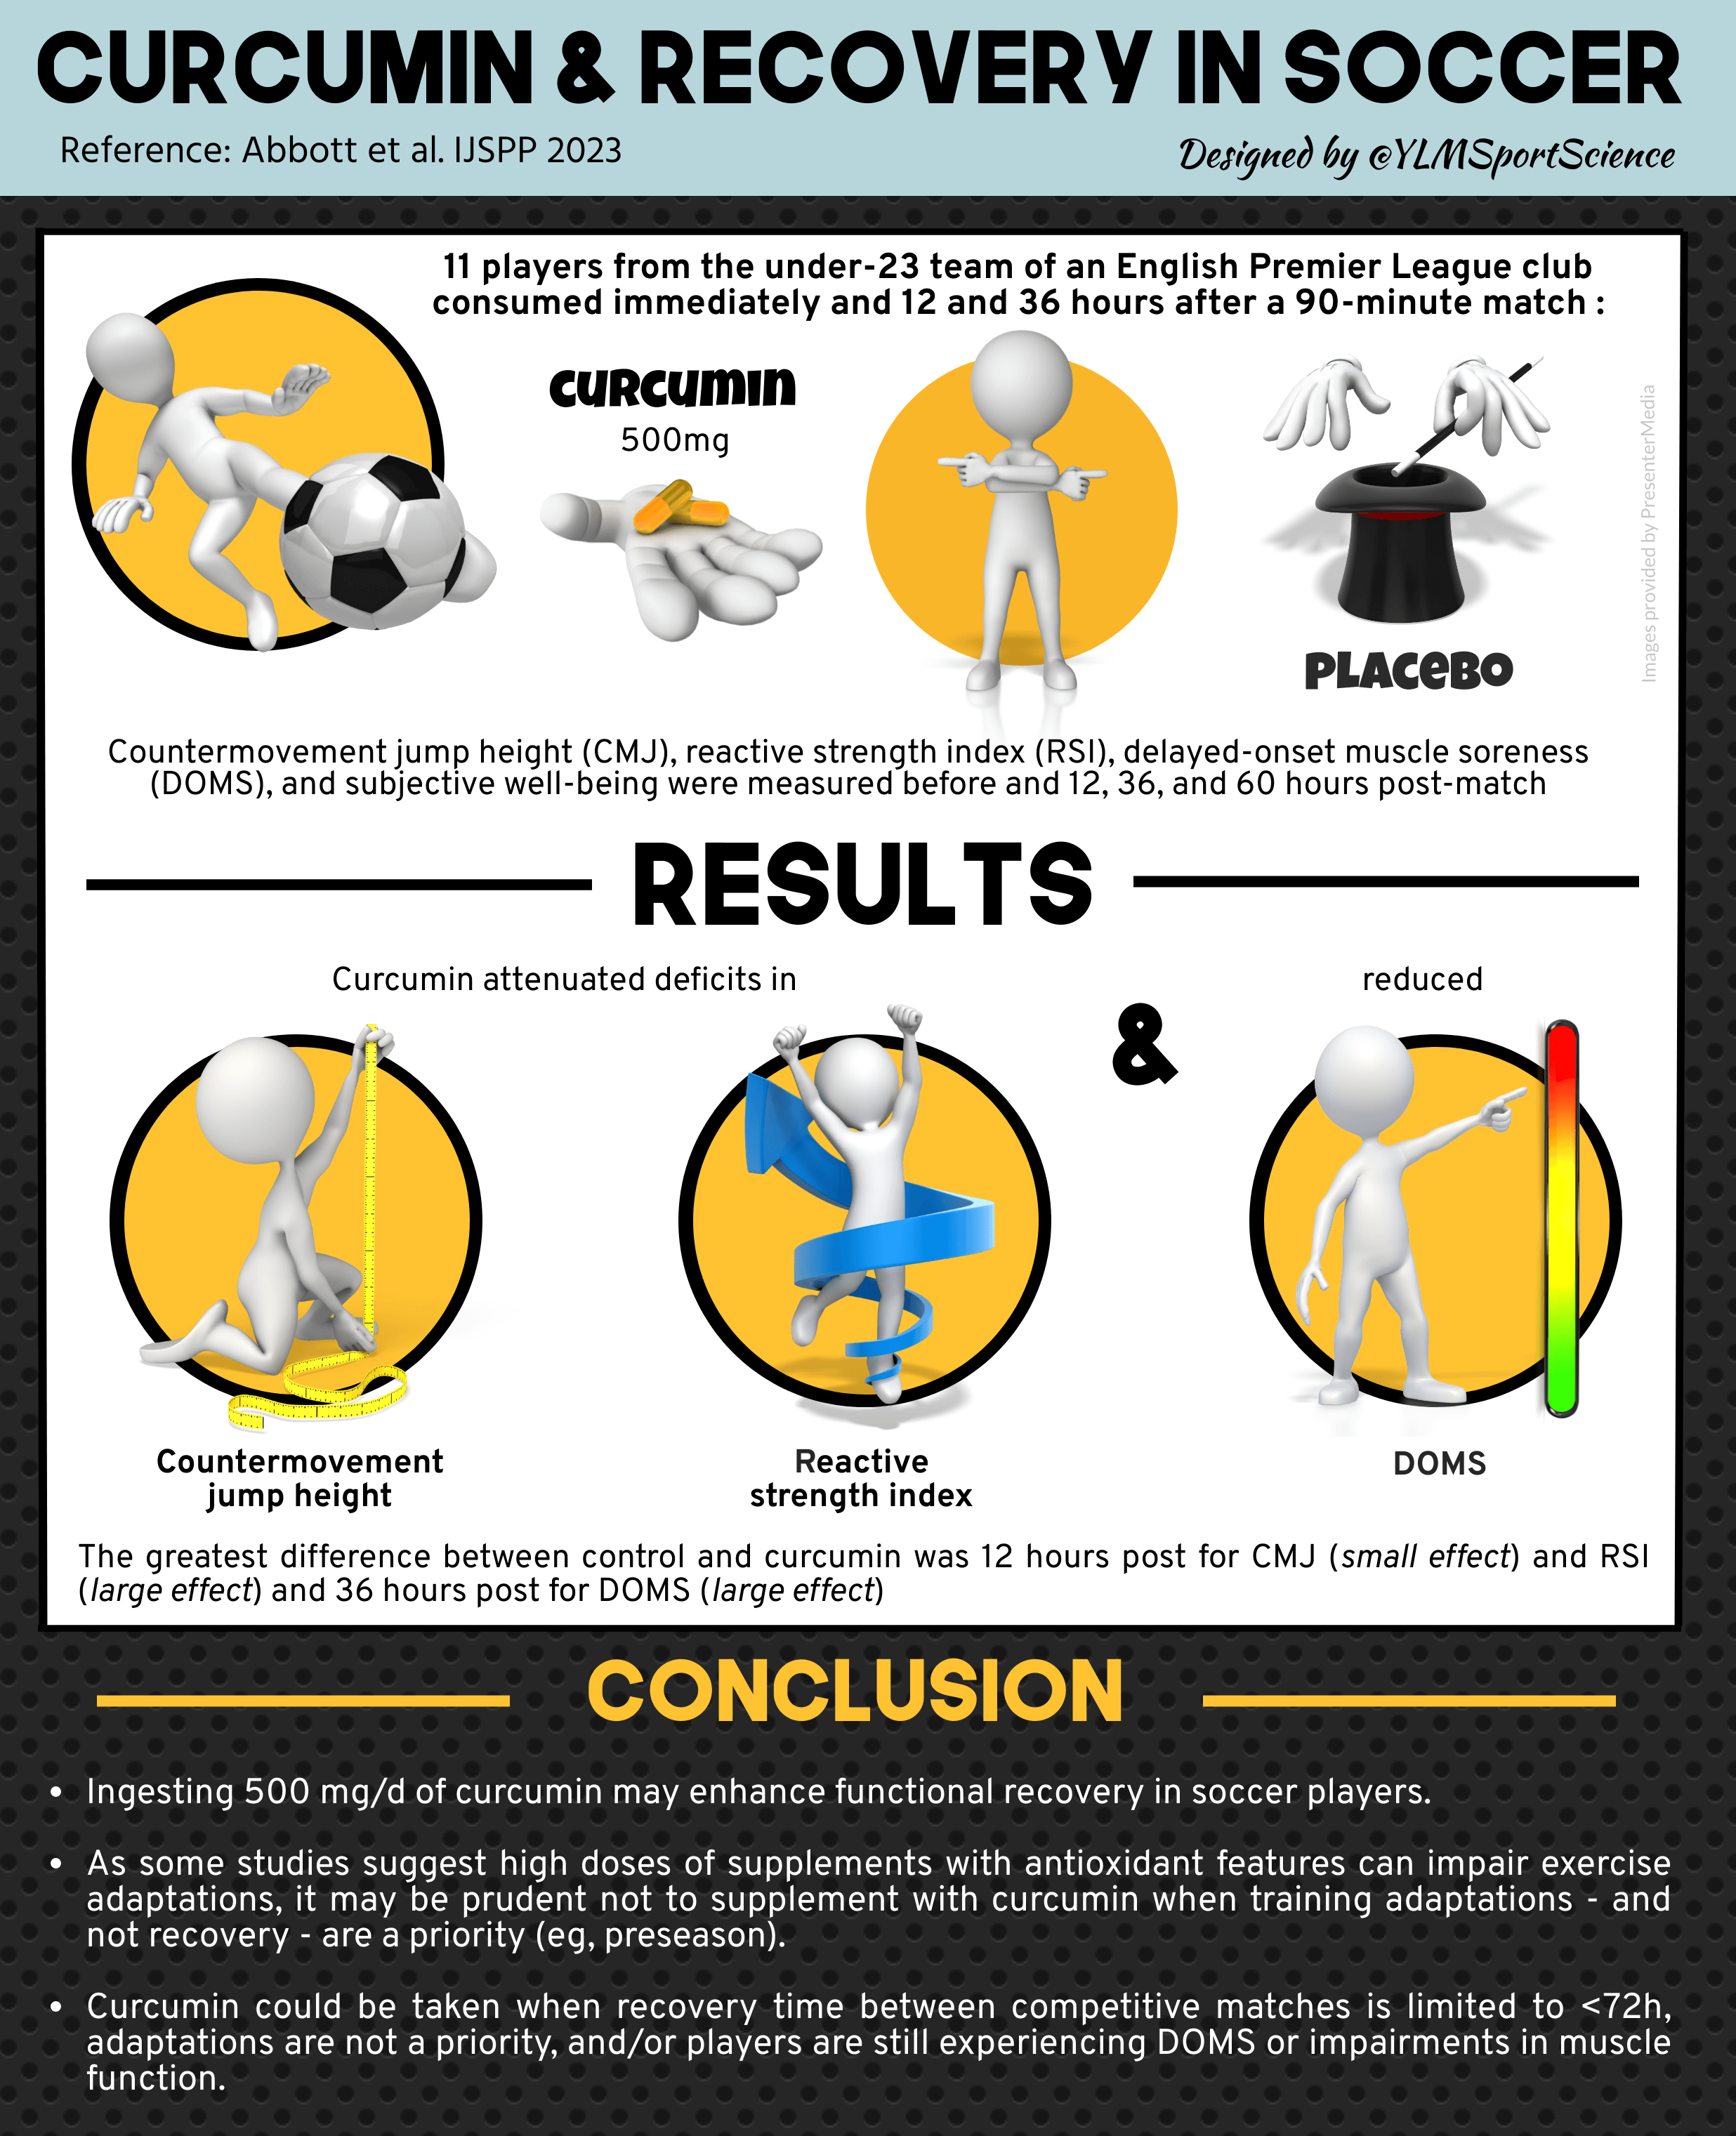 Curcumin Attenuates Delayed-Onset Muscle Soreness and Muscle Function Deficits Following a Soccer Match in Male Professional Soccer Players